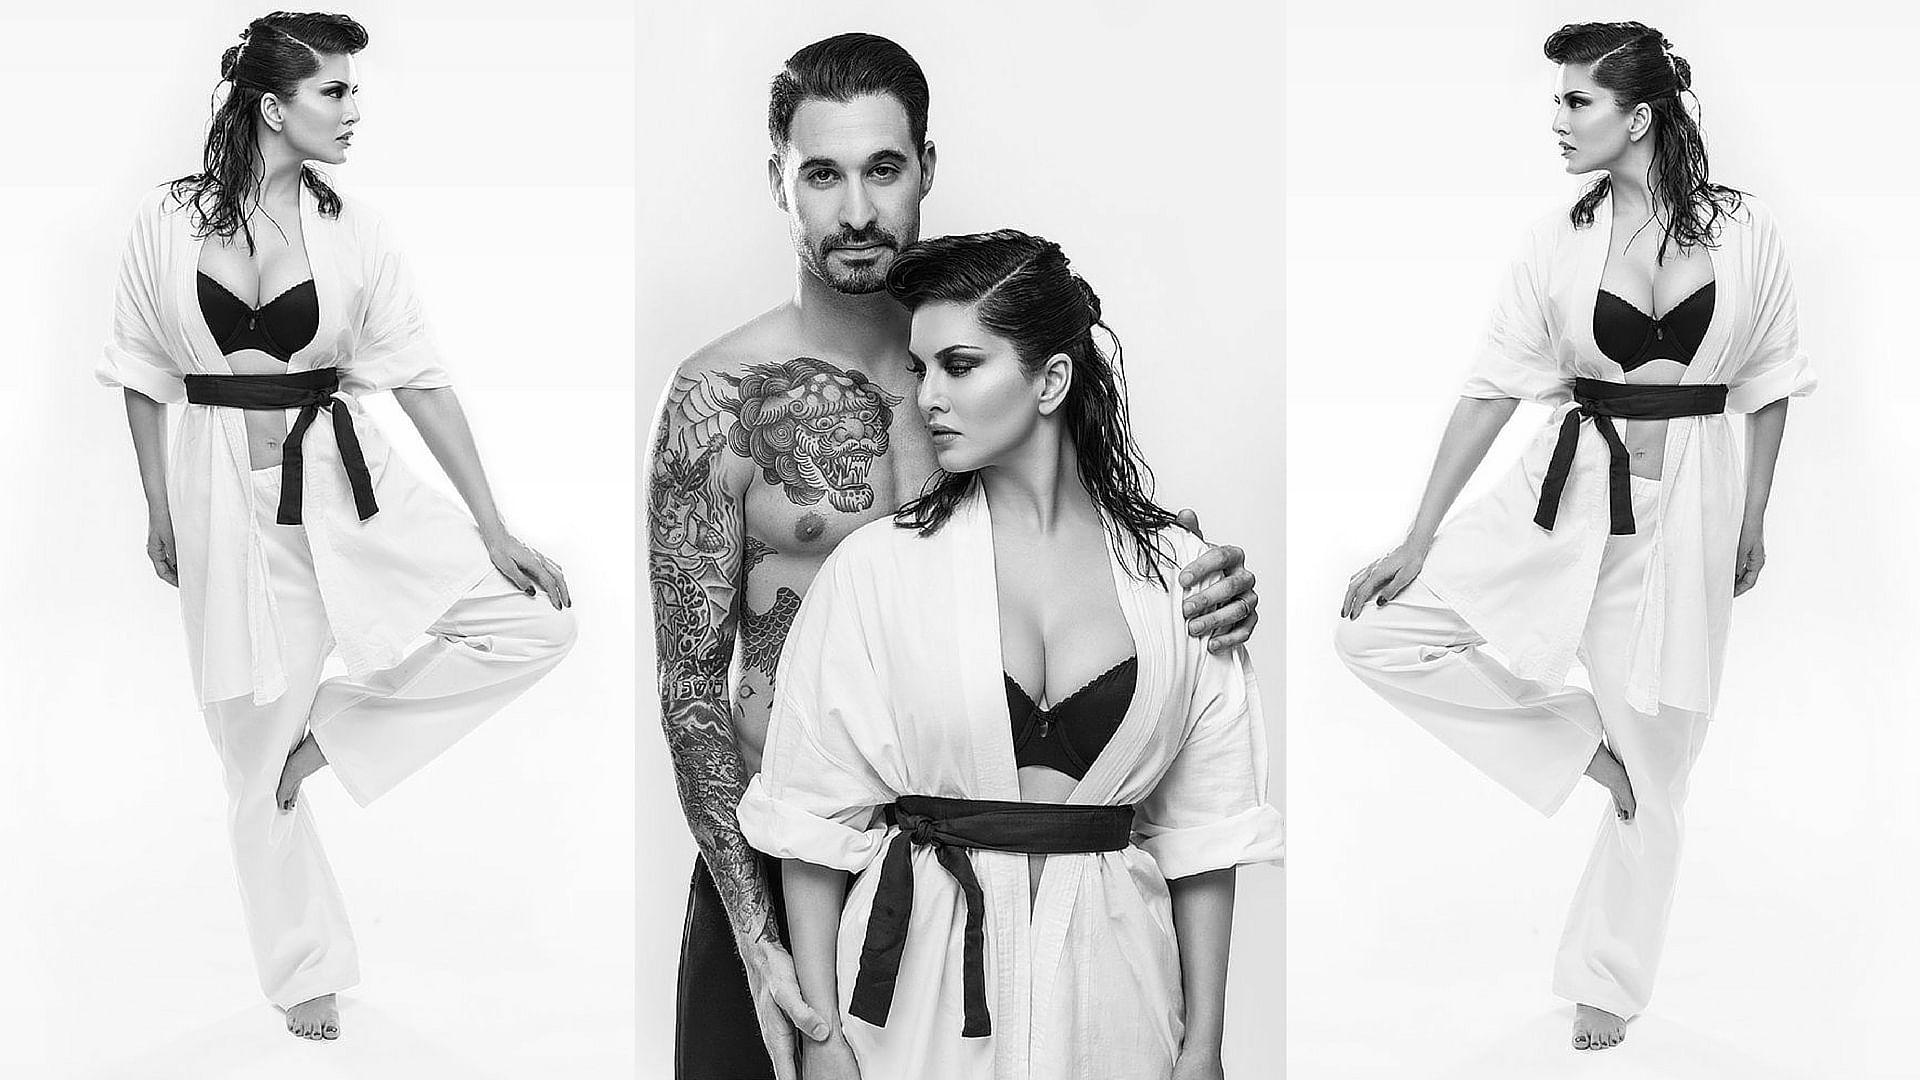 Sunny Leone and Daniel Weber feature on the cover of FHM magazine’s May issue (Photo: Twitter/@fhmindia)